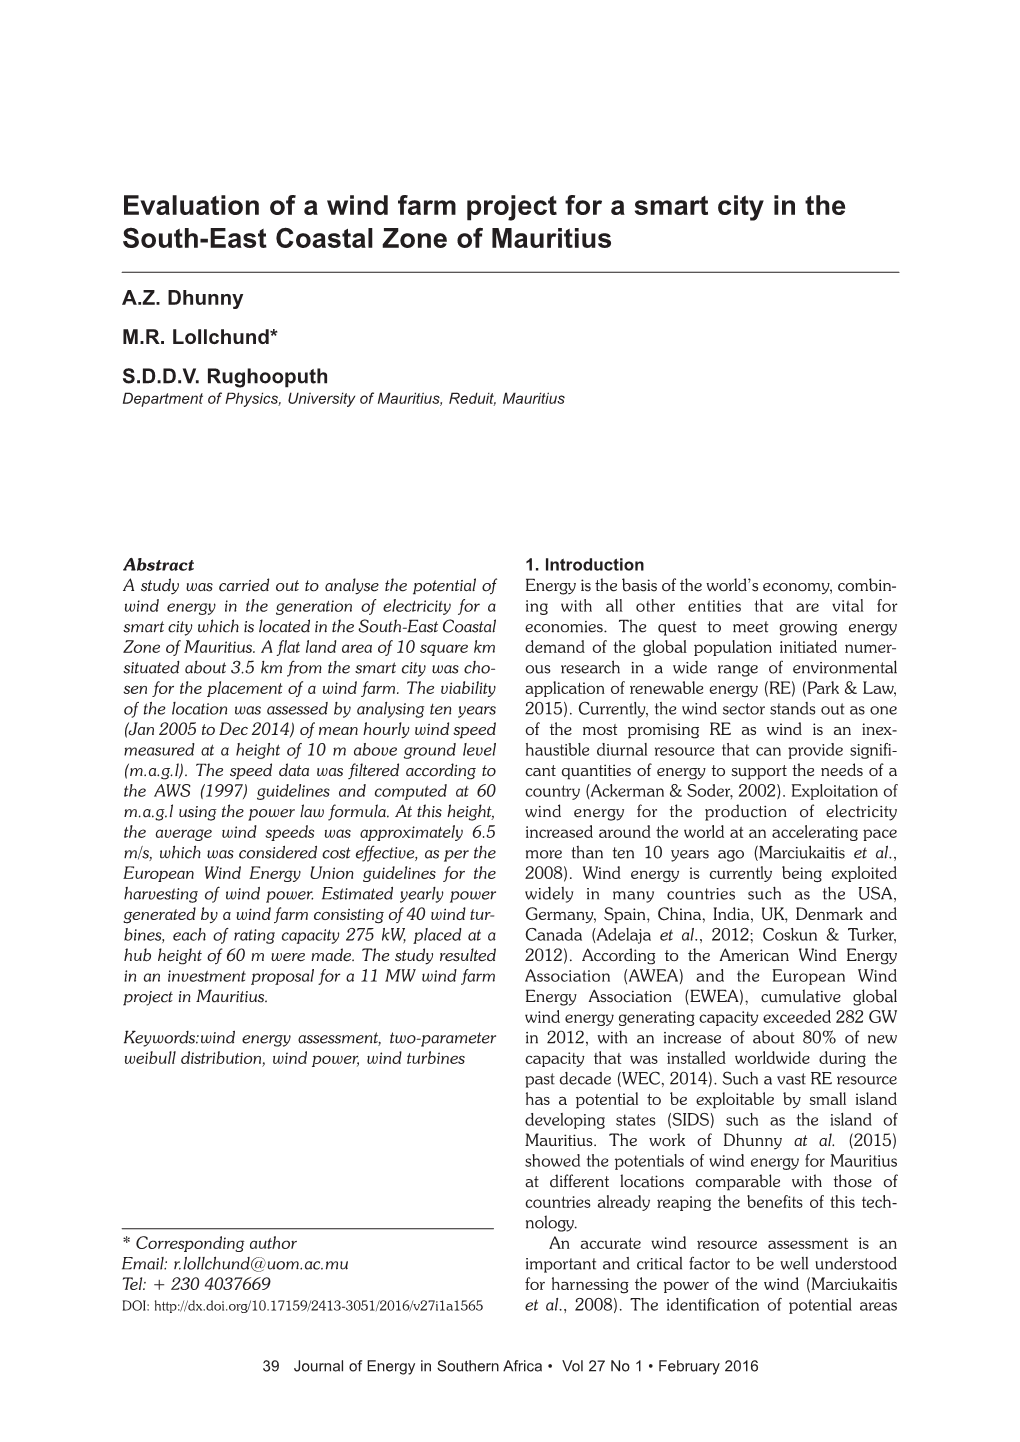 Evaluation of a Wind Farm Project for a Smart City in the South-East Coastal Zone of Mauritius